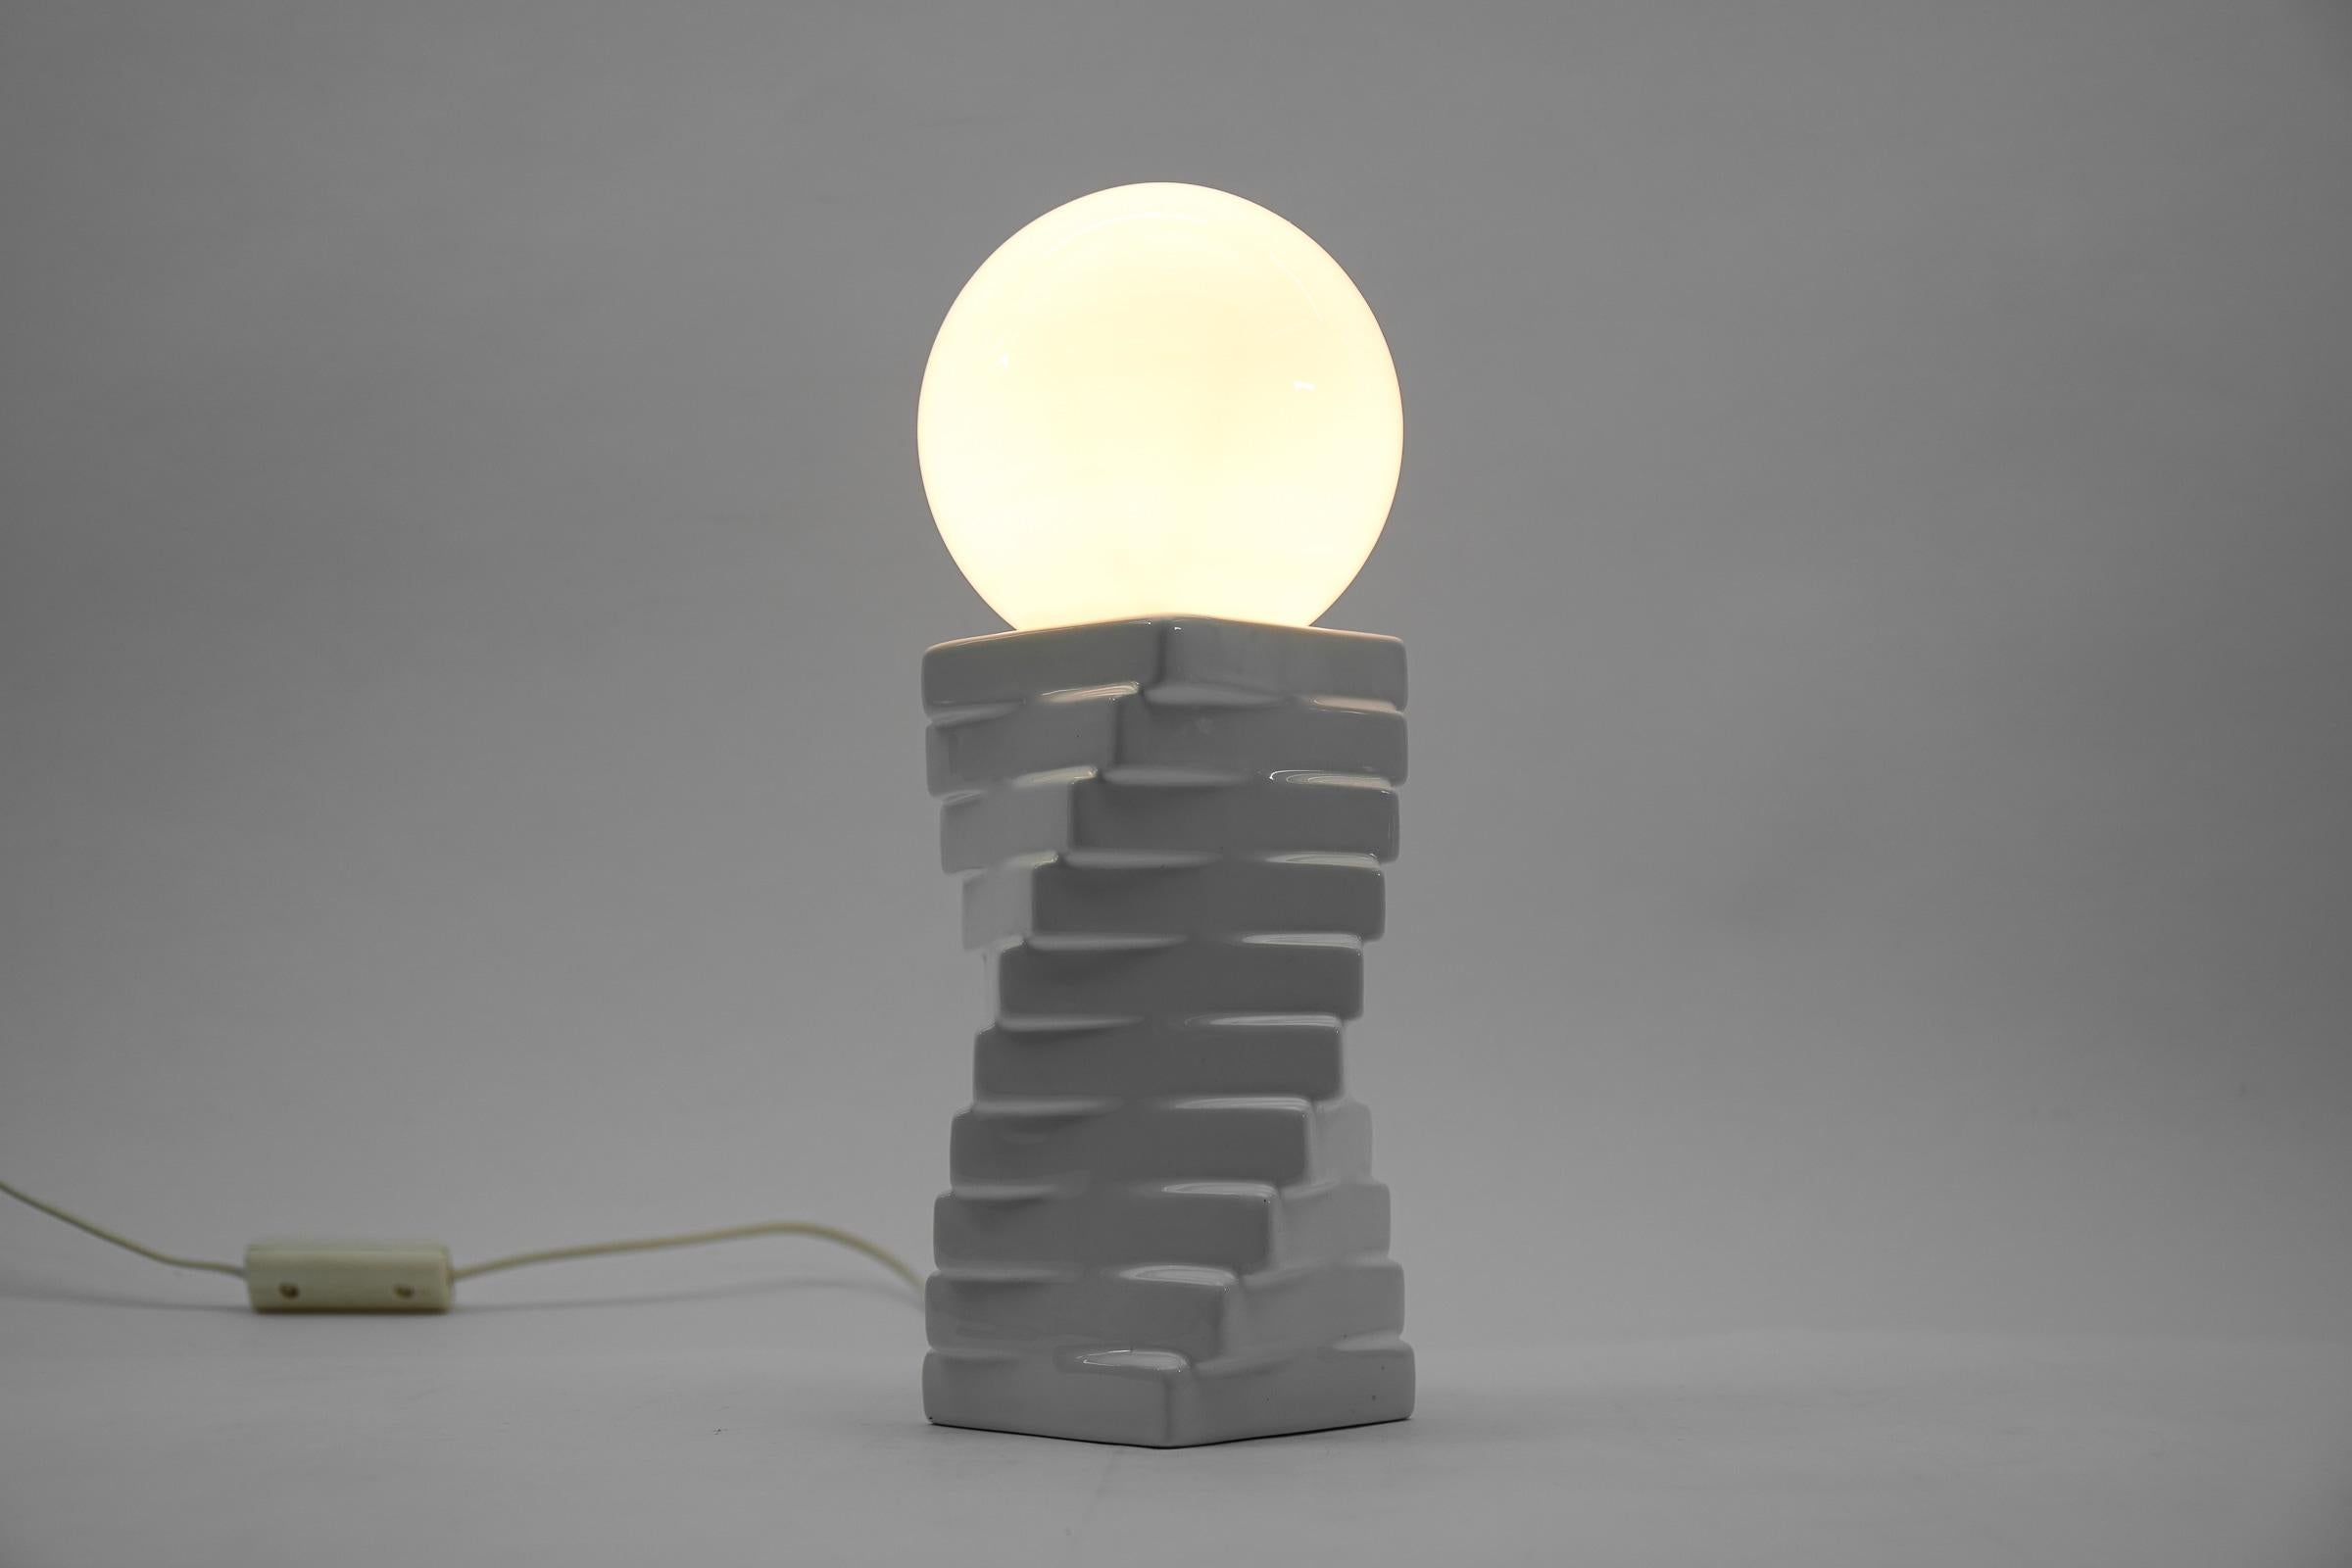 Mid-Century Modern Italian Ceramic Table Lamp with a Milk Glass Ball Shade, 1960s For Sale